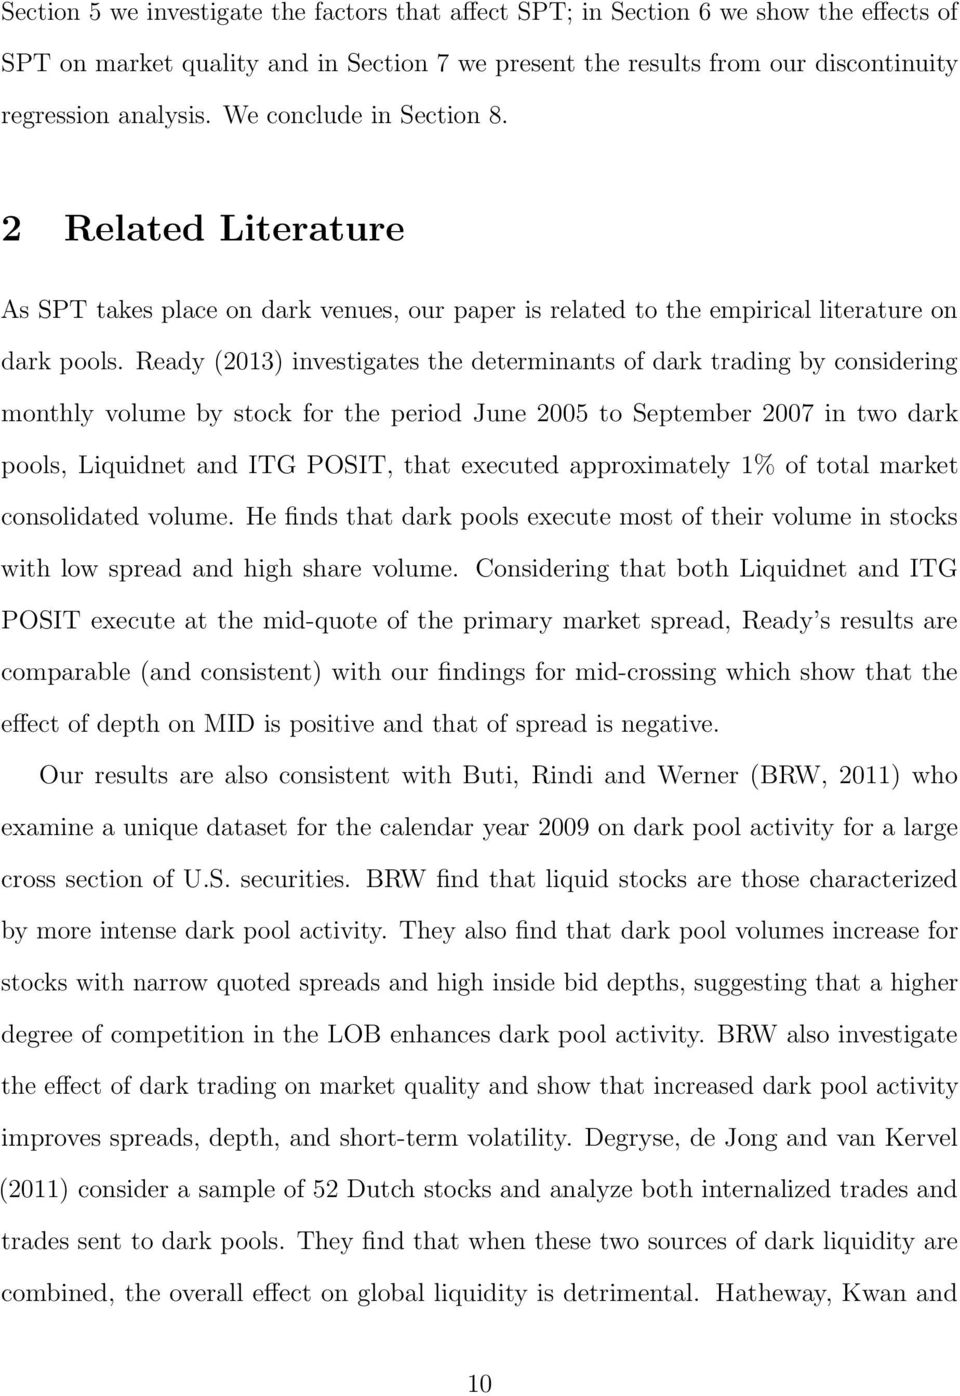 Ready (2013) investigates the determinants of dark trading by considering monthly volume by stock for the period June 2005 to September 2007 in two dark pools, Liquidnet and ITG POSIT, that executed